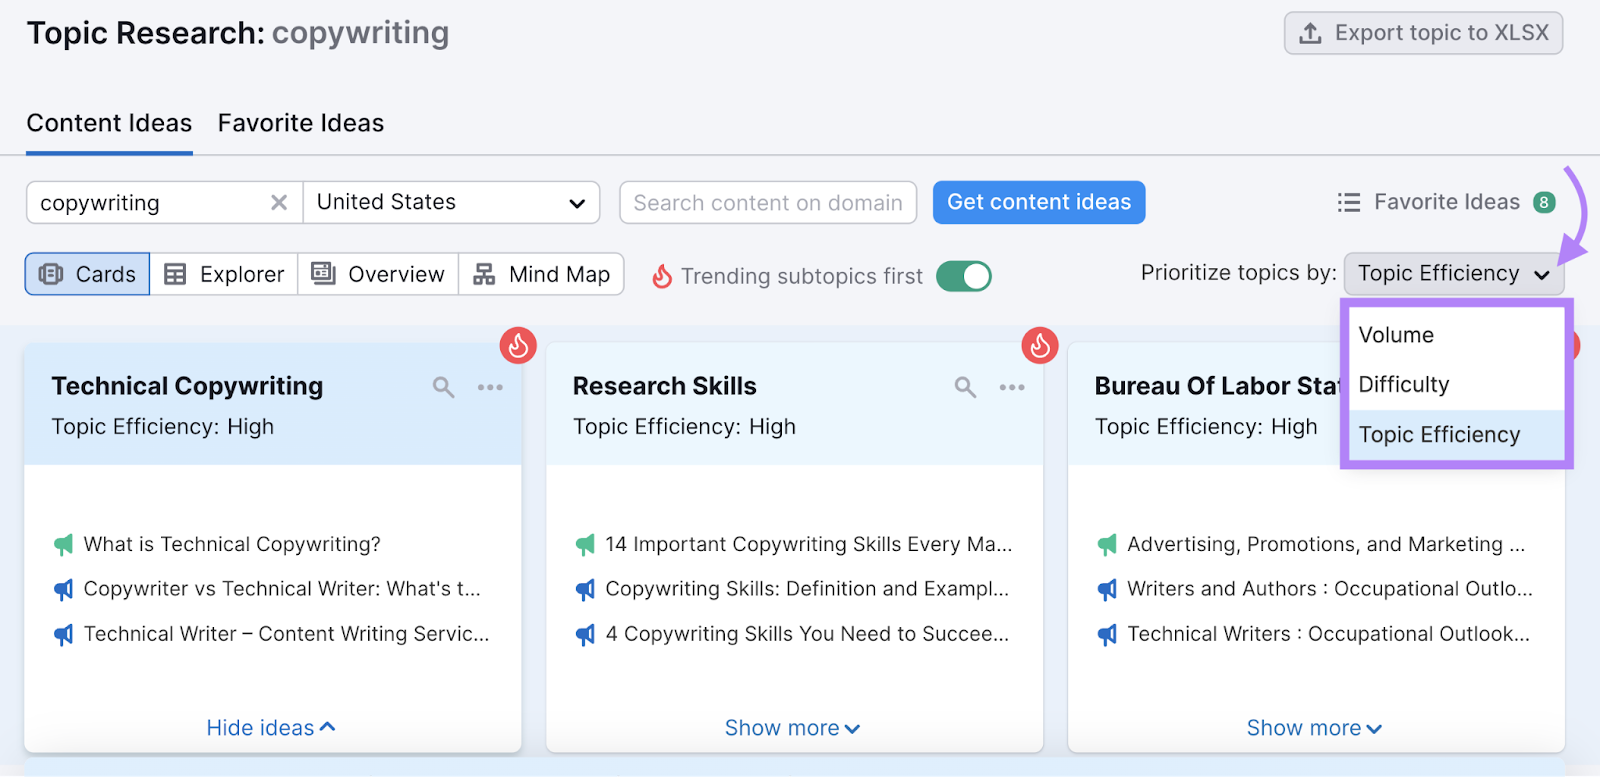 "Topic Efficiency" filter in Topic Research tool